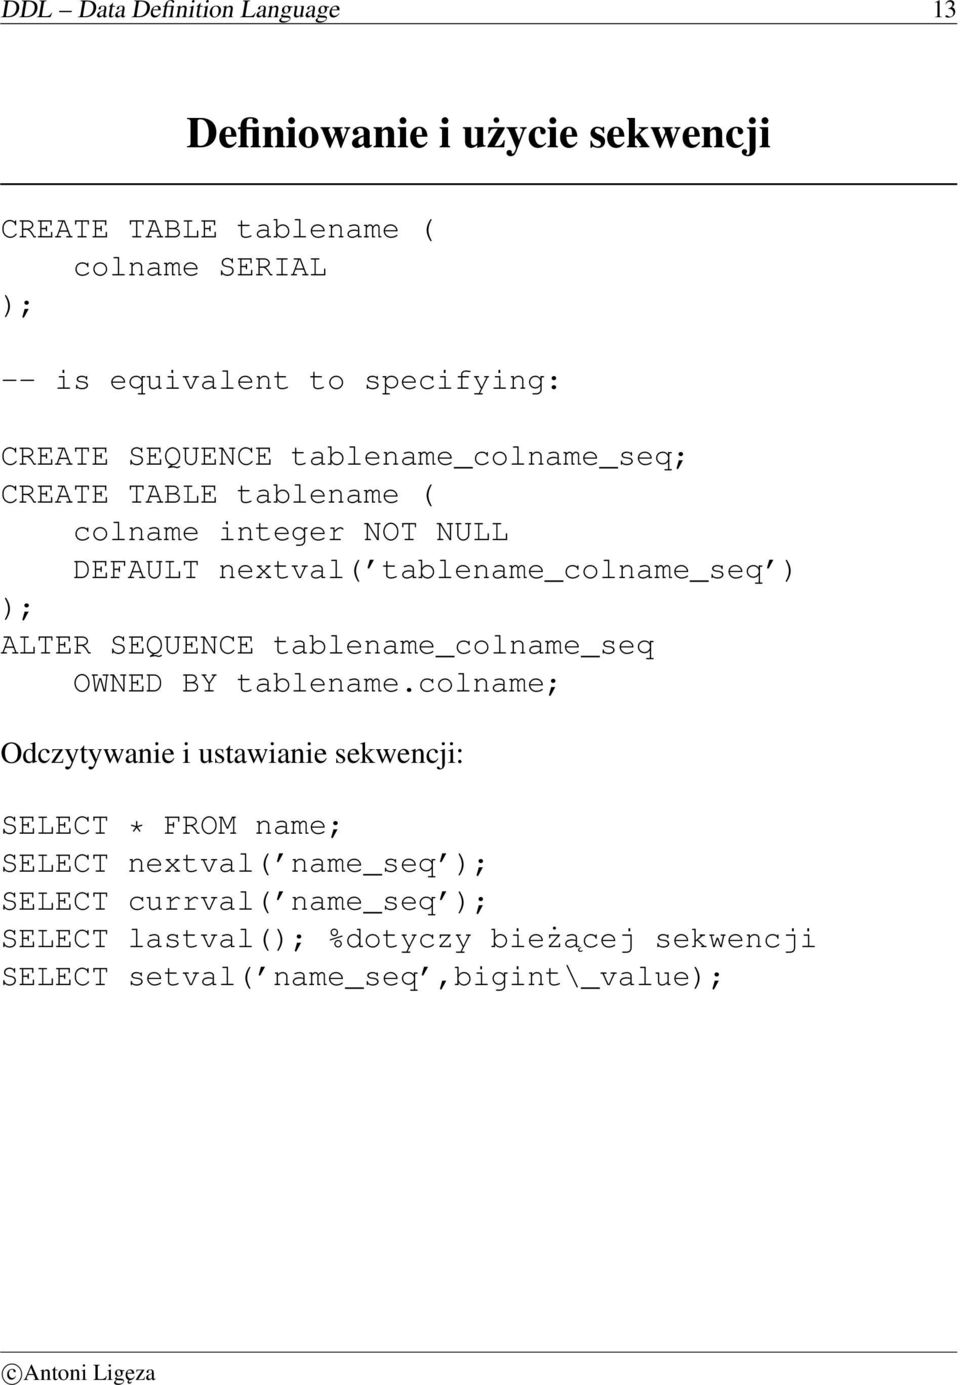 tablename_colname_seq ) ); ALTER SEQUENCE tablename_colname_seq OWNED BY tablename.